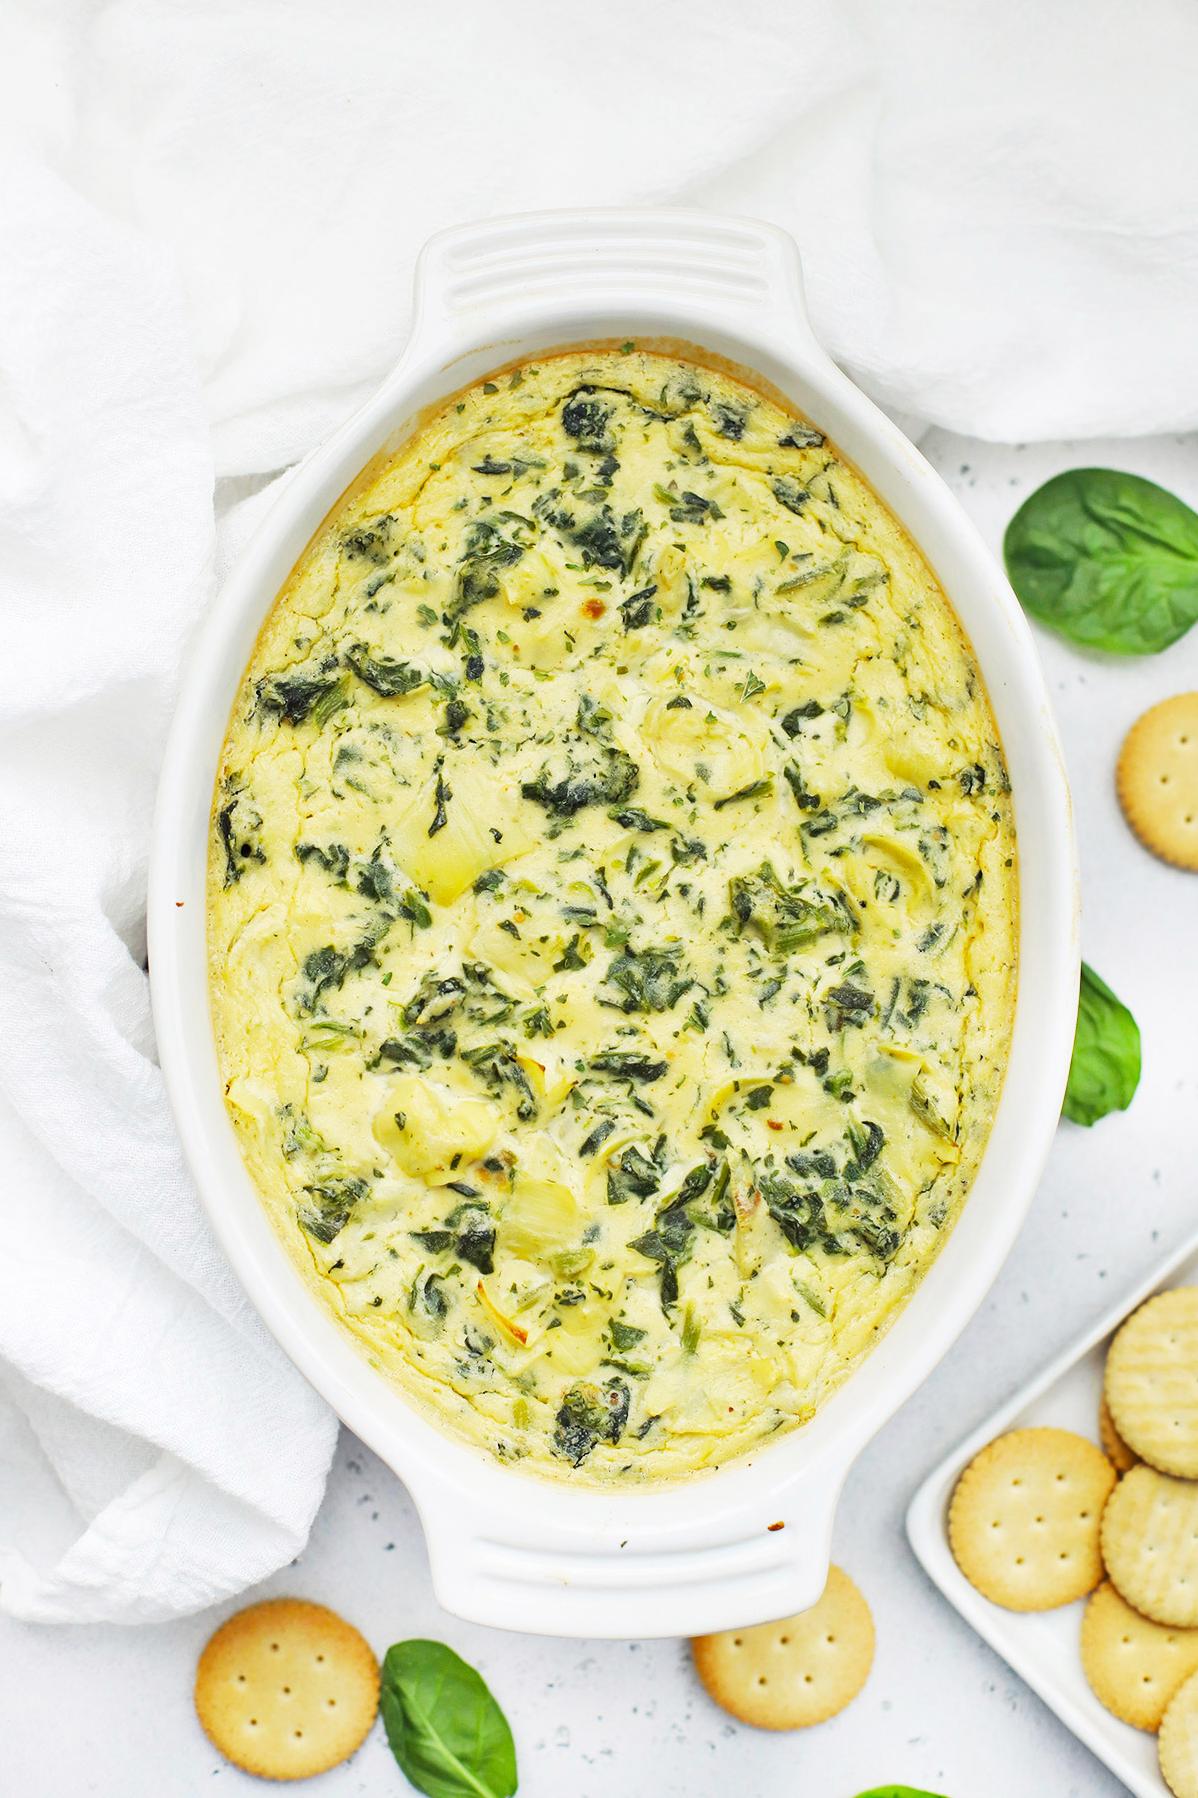  Creamy, dreamy Artichoke Dip without the dairy? Yes, please!